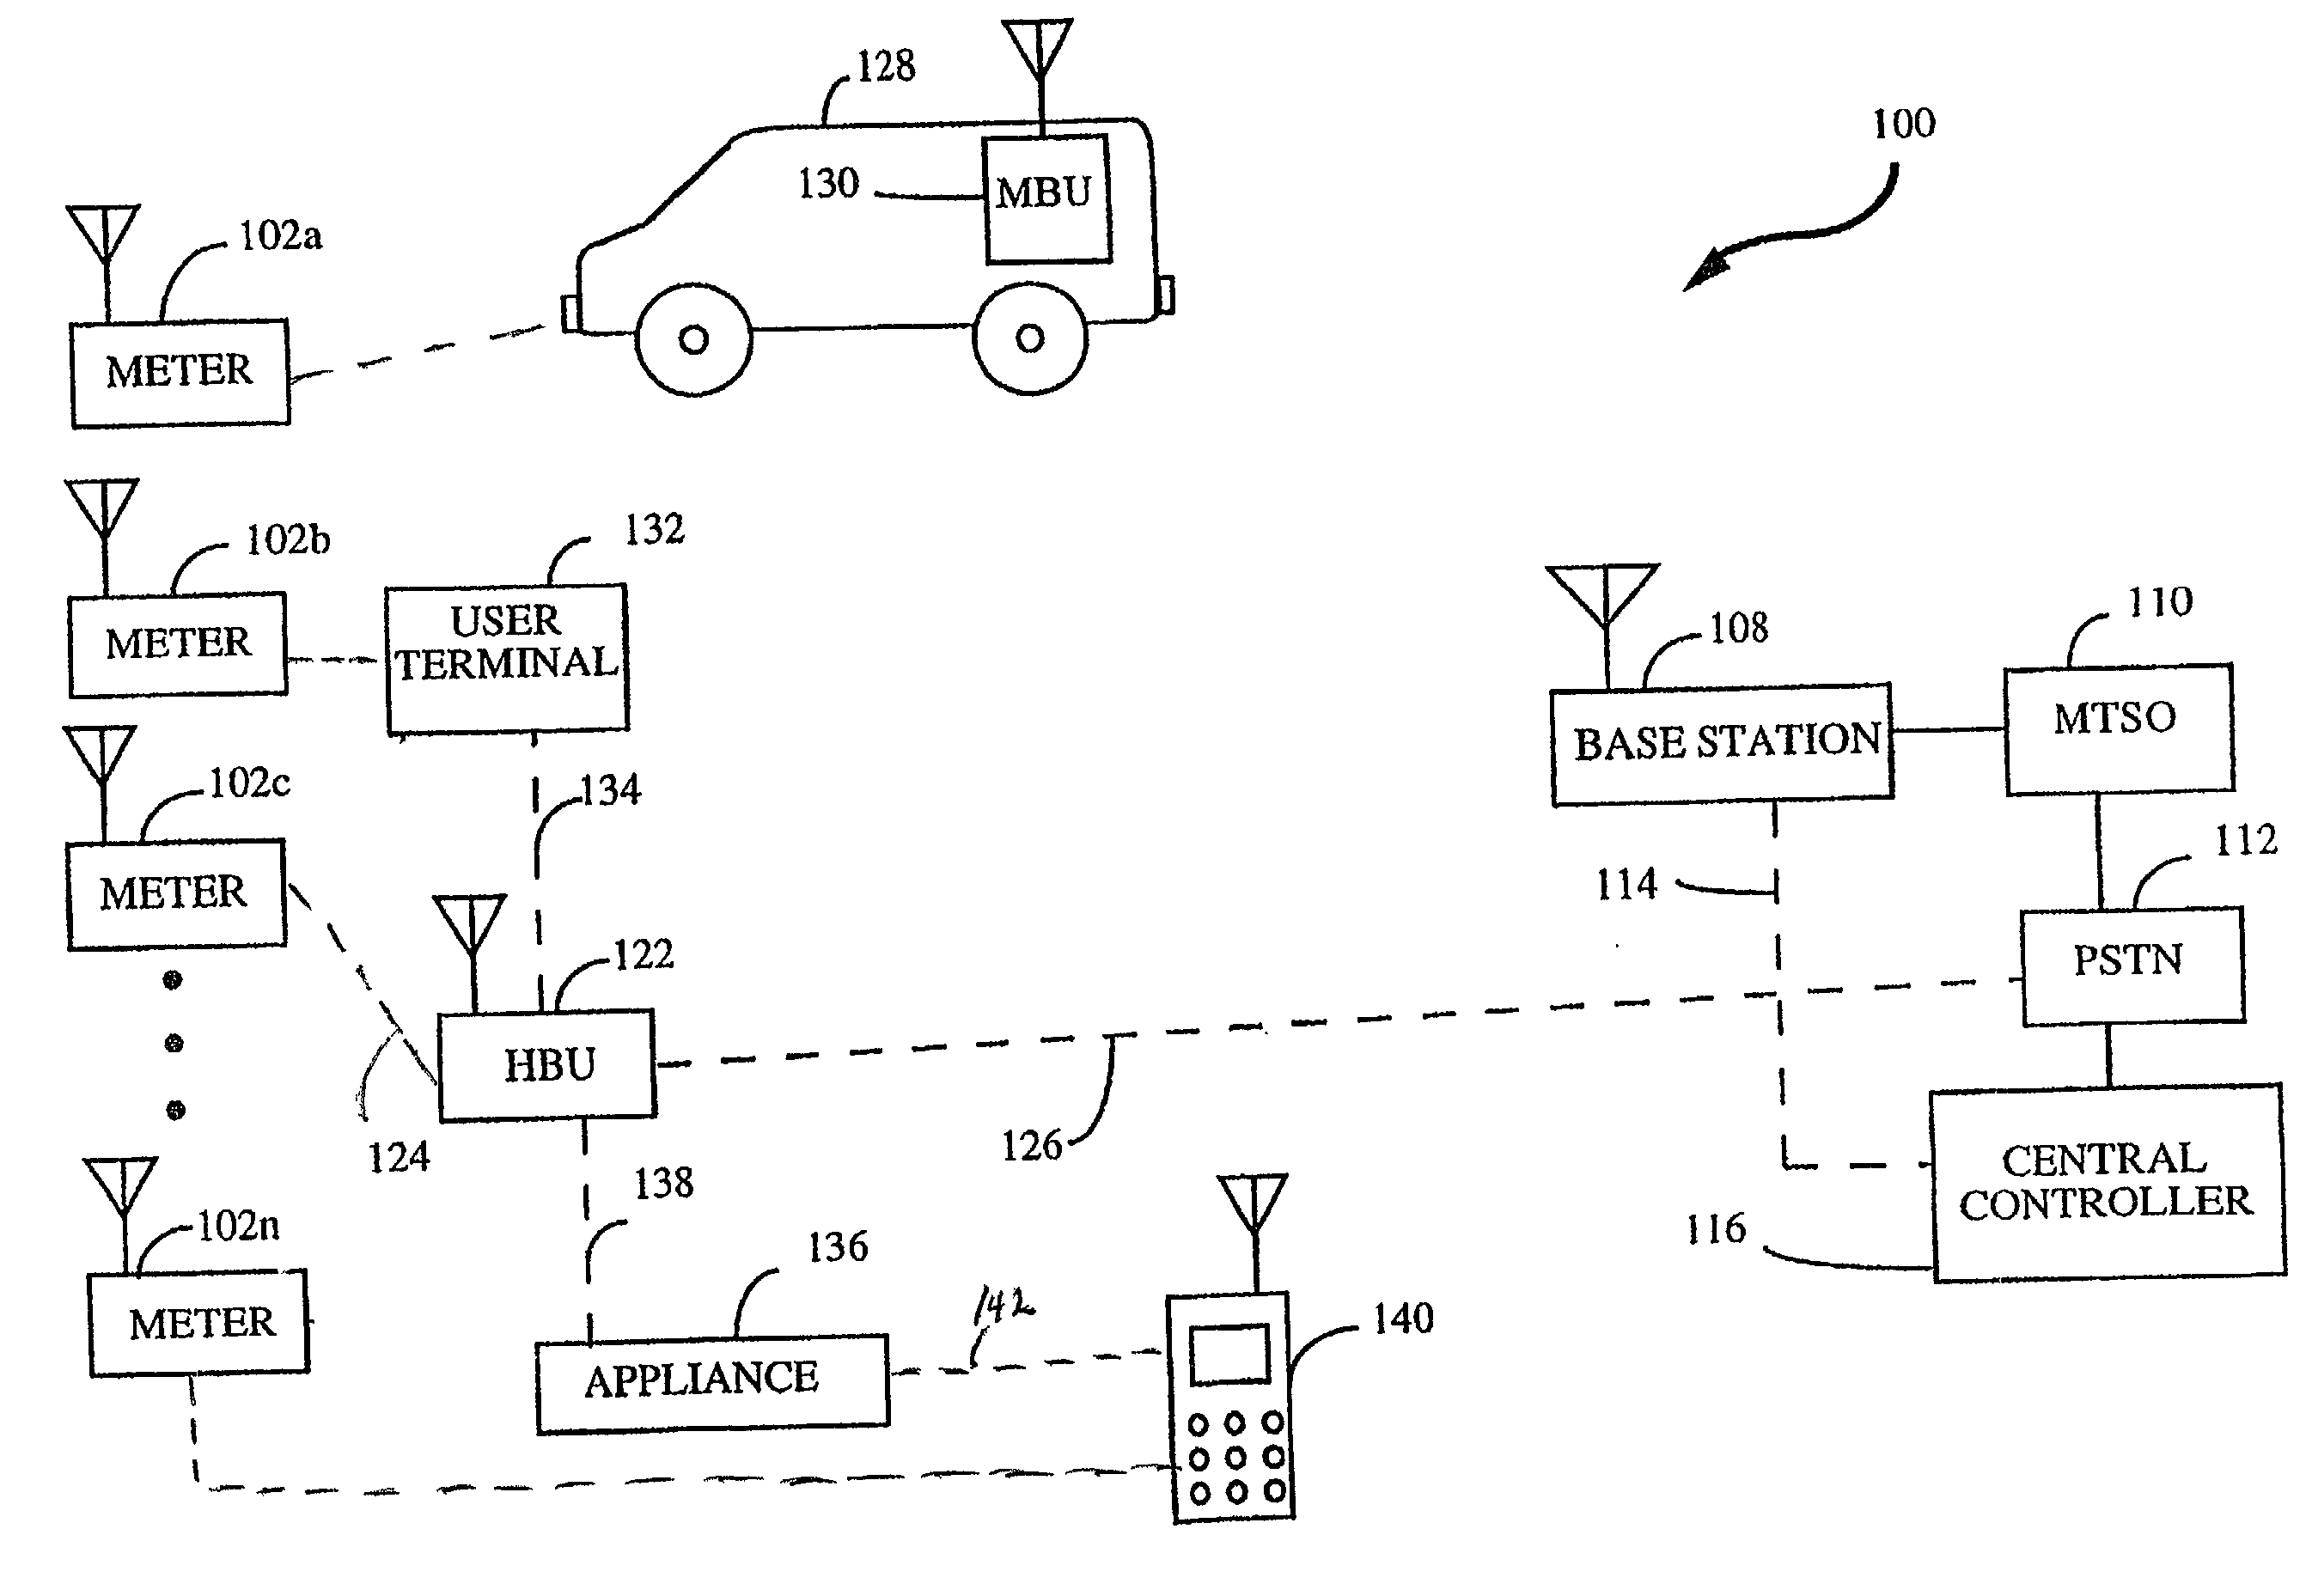 Method and apparatus for wireless remote telemetry using ad-hoc networks